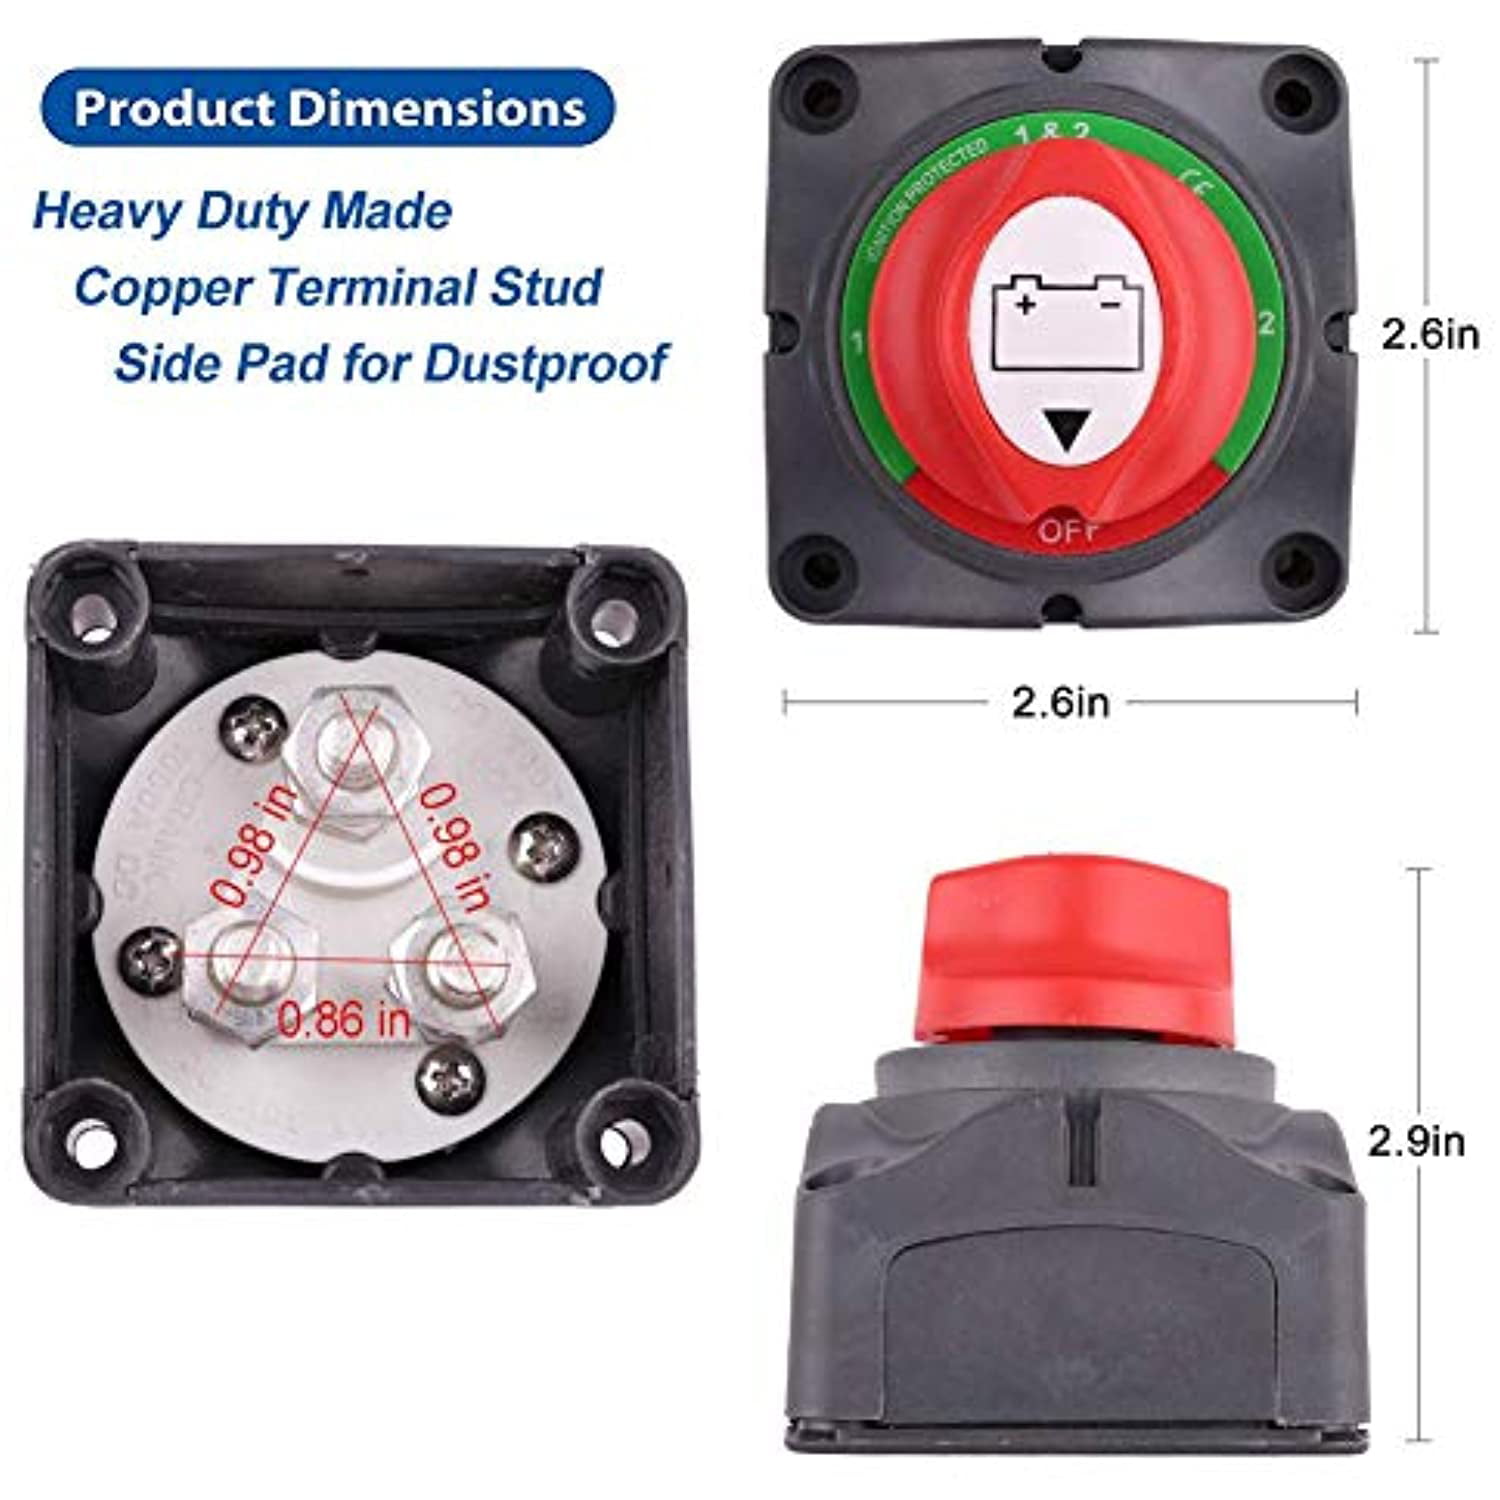 Allaind Battery Disconnect Switch 12V 24V 48V 60V Battery Master Cut Off Isolator Switch Waterproof for Marine Boat Auto Camper RV ATV UTV Vehicles Military Quality On/Off Position 